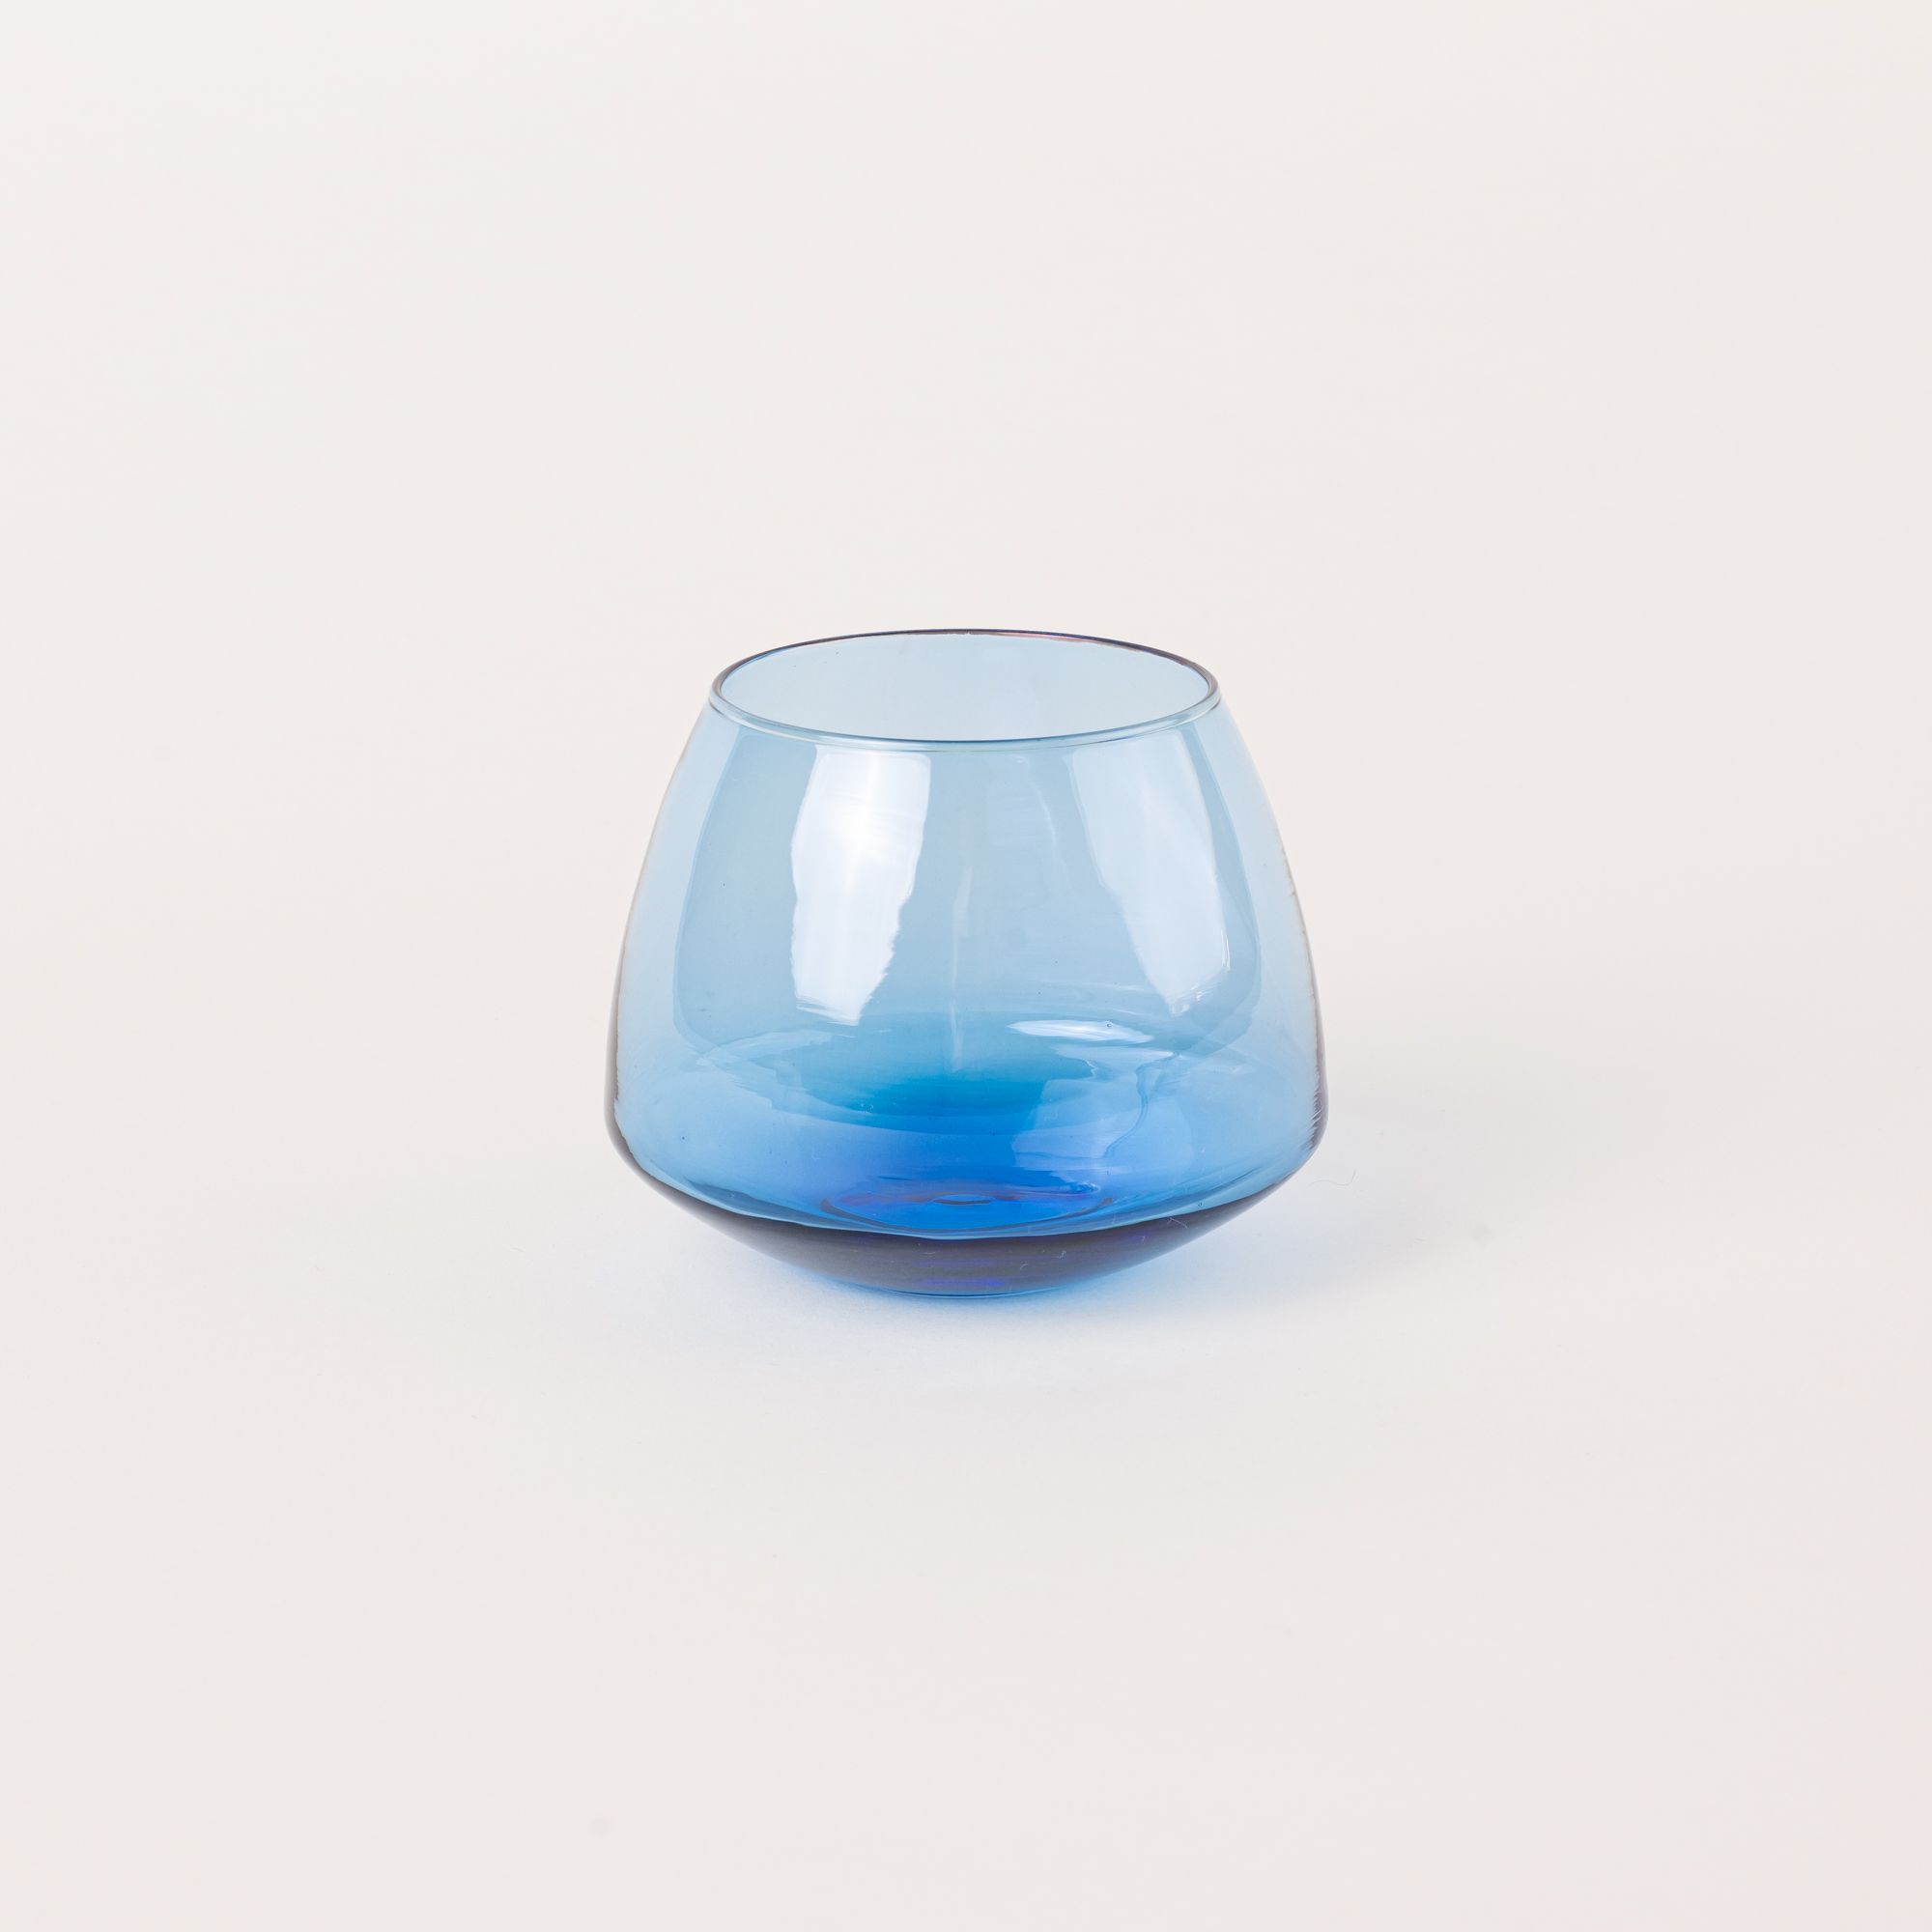 A light blue glass whiskey snifter with a rounded base